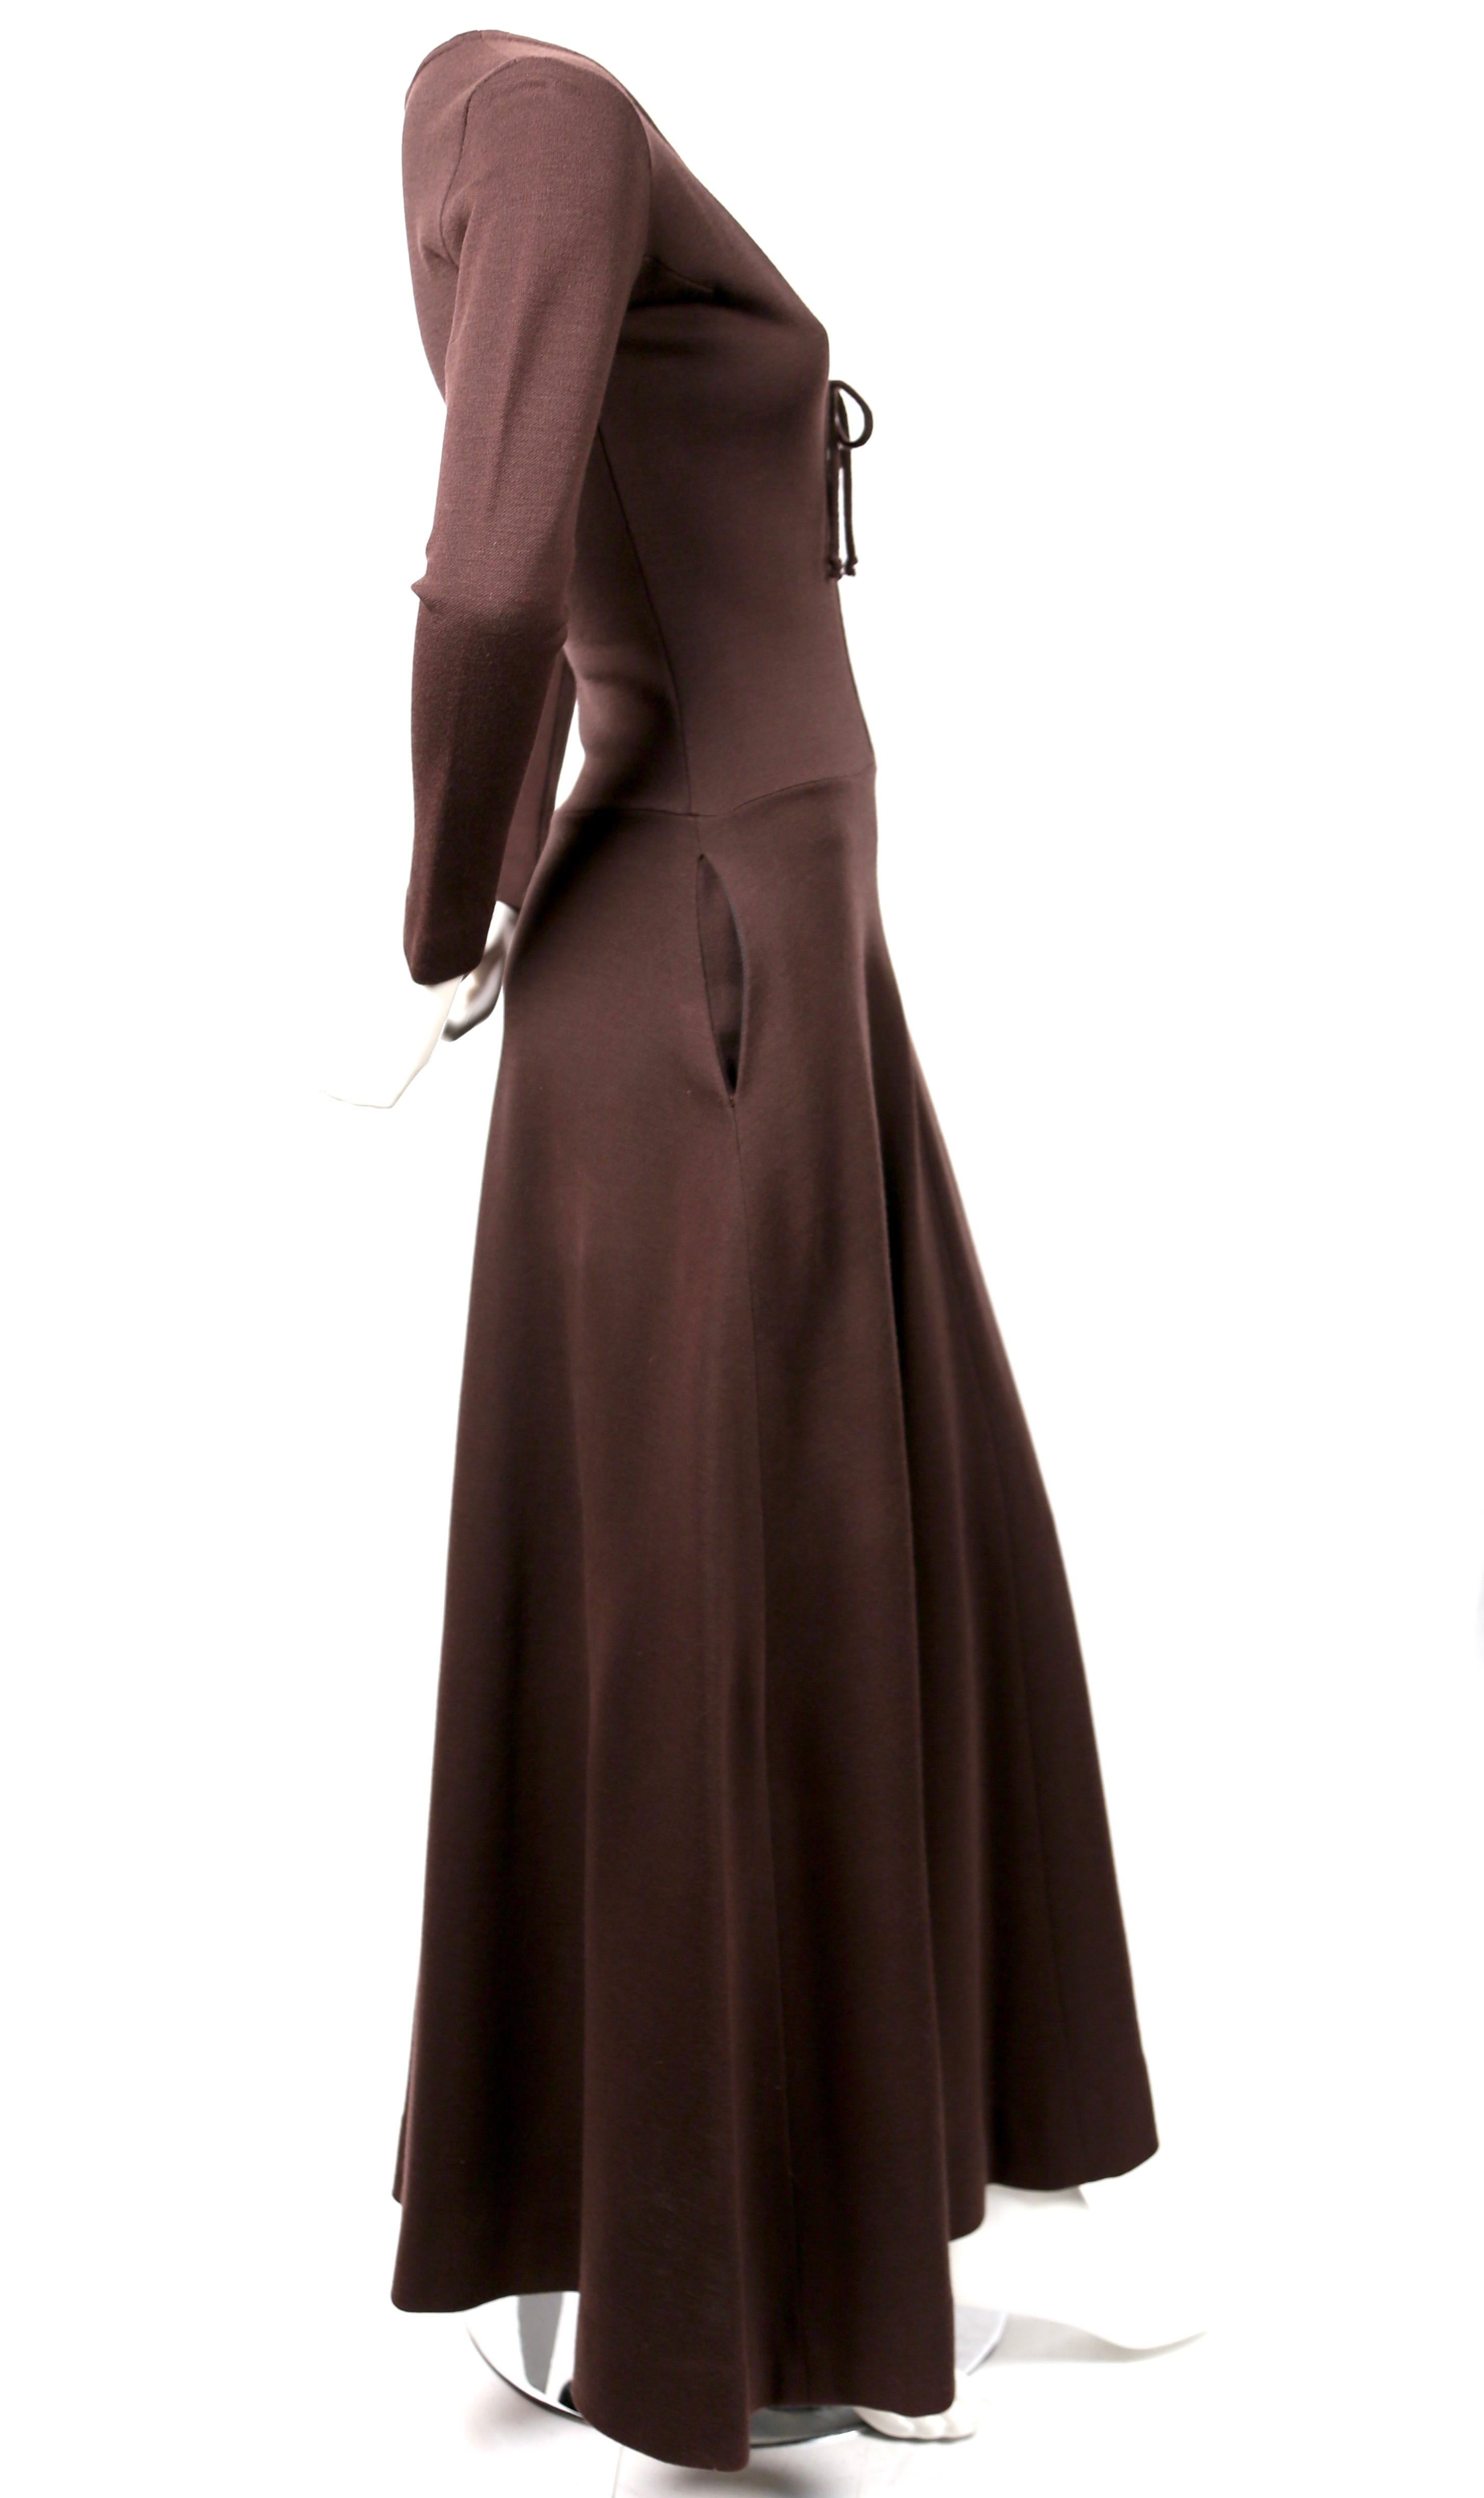 Deep brown, ankle-length, wool dress with plunging deep V neckline and long sleeves designed by Rudi Gernreich dating to the 1960's. Labeled a size 8 however this best fits a US 2 to 4. Dress was not clipped on size 2 mannequin. Hidden pockets at